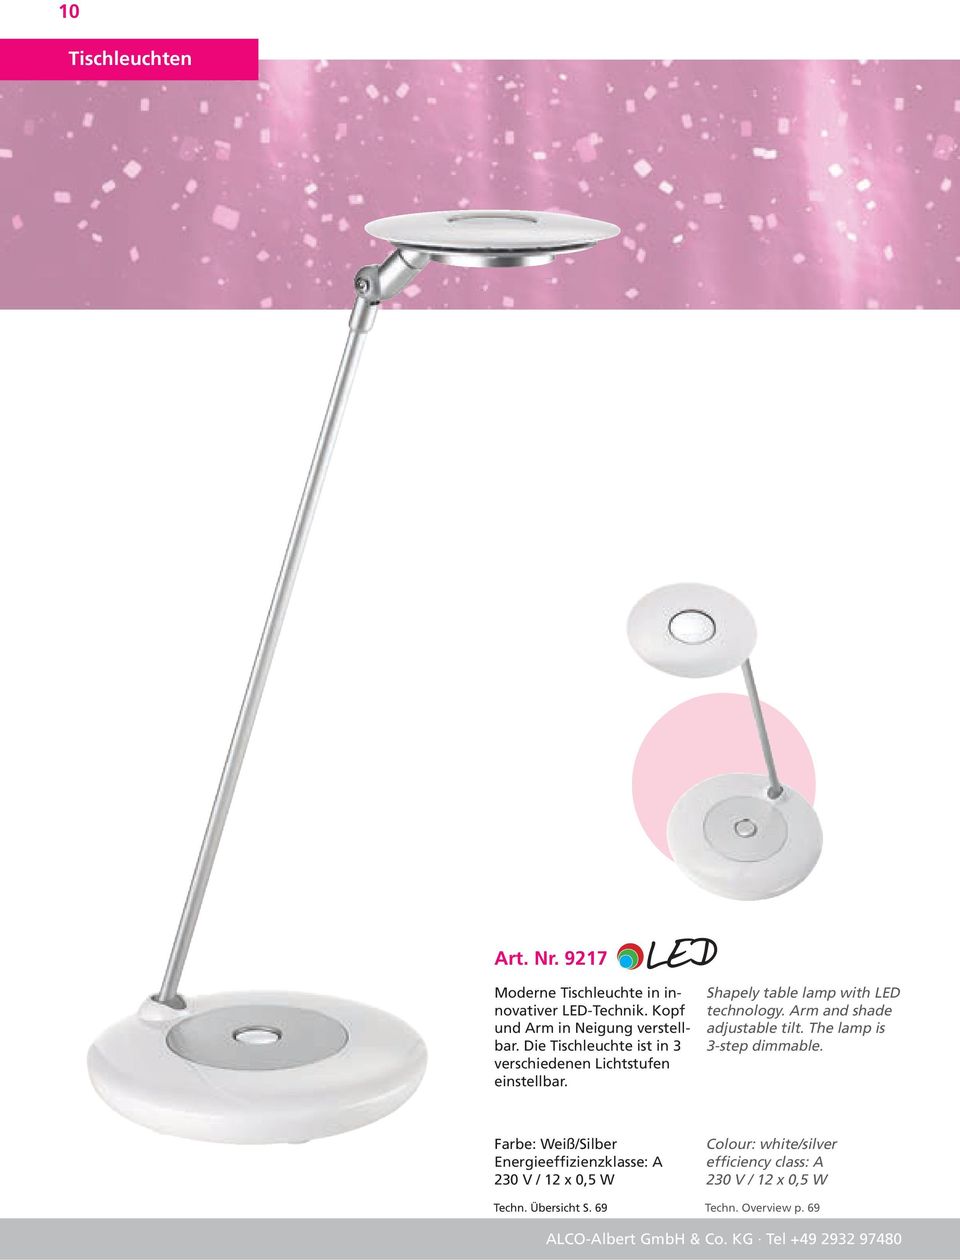 Shapely table lamp with technology. Arm and shade adjustable tilt. The lamp is 3-step dimmable.